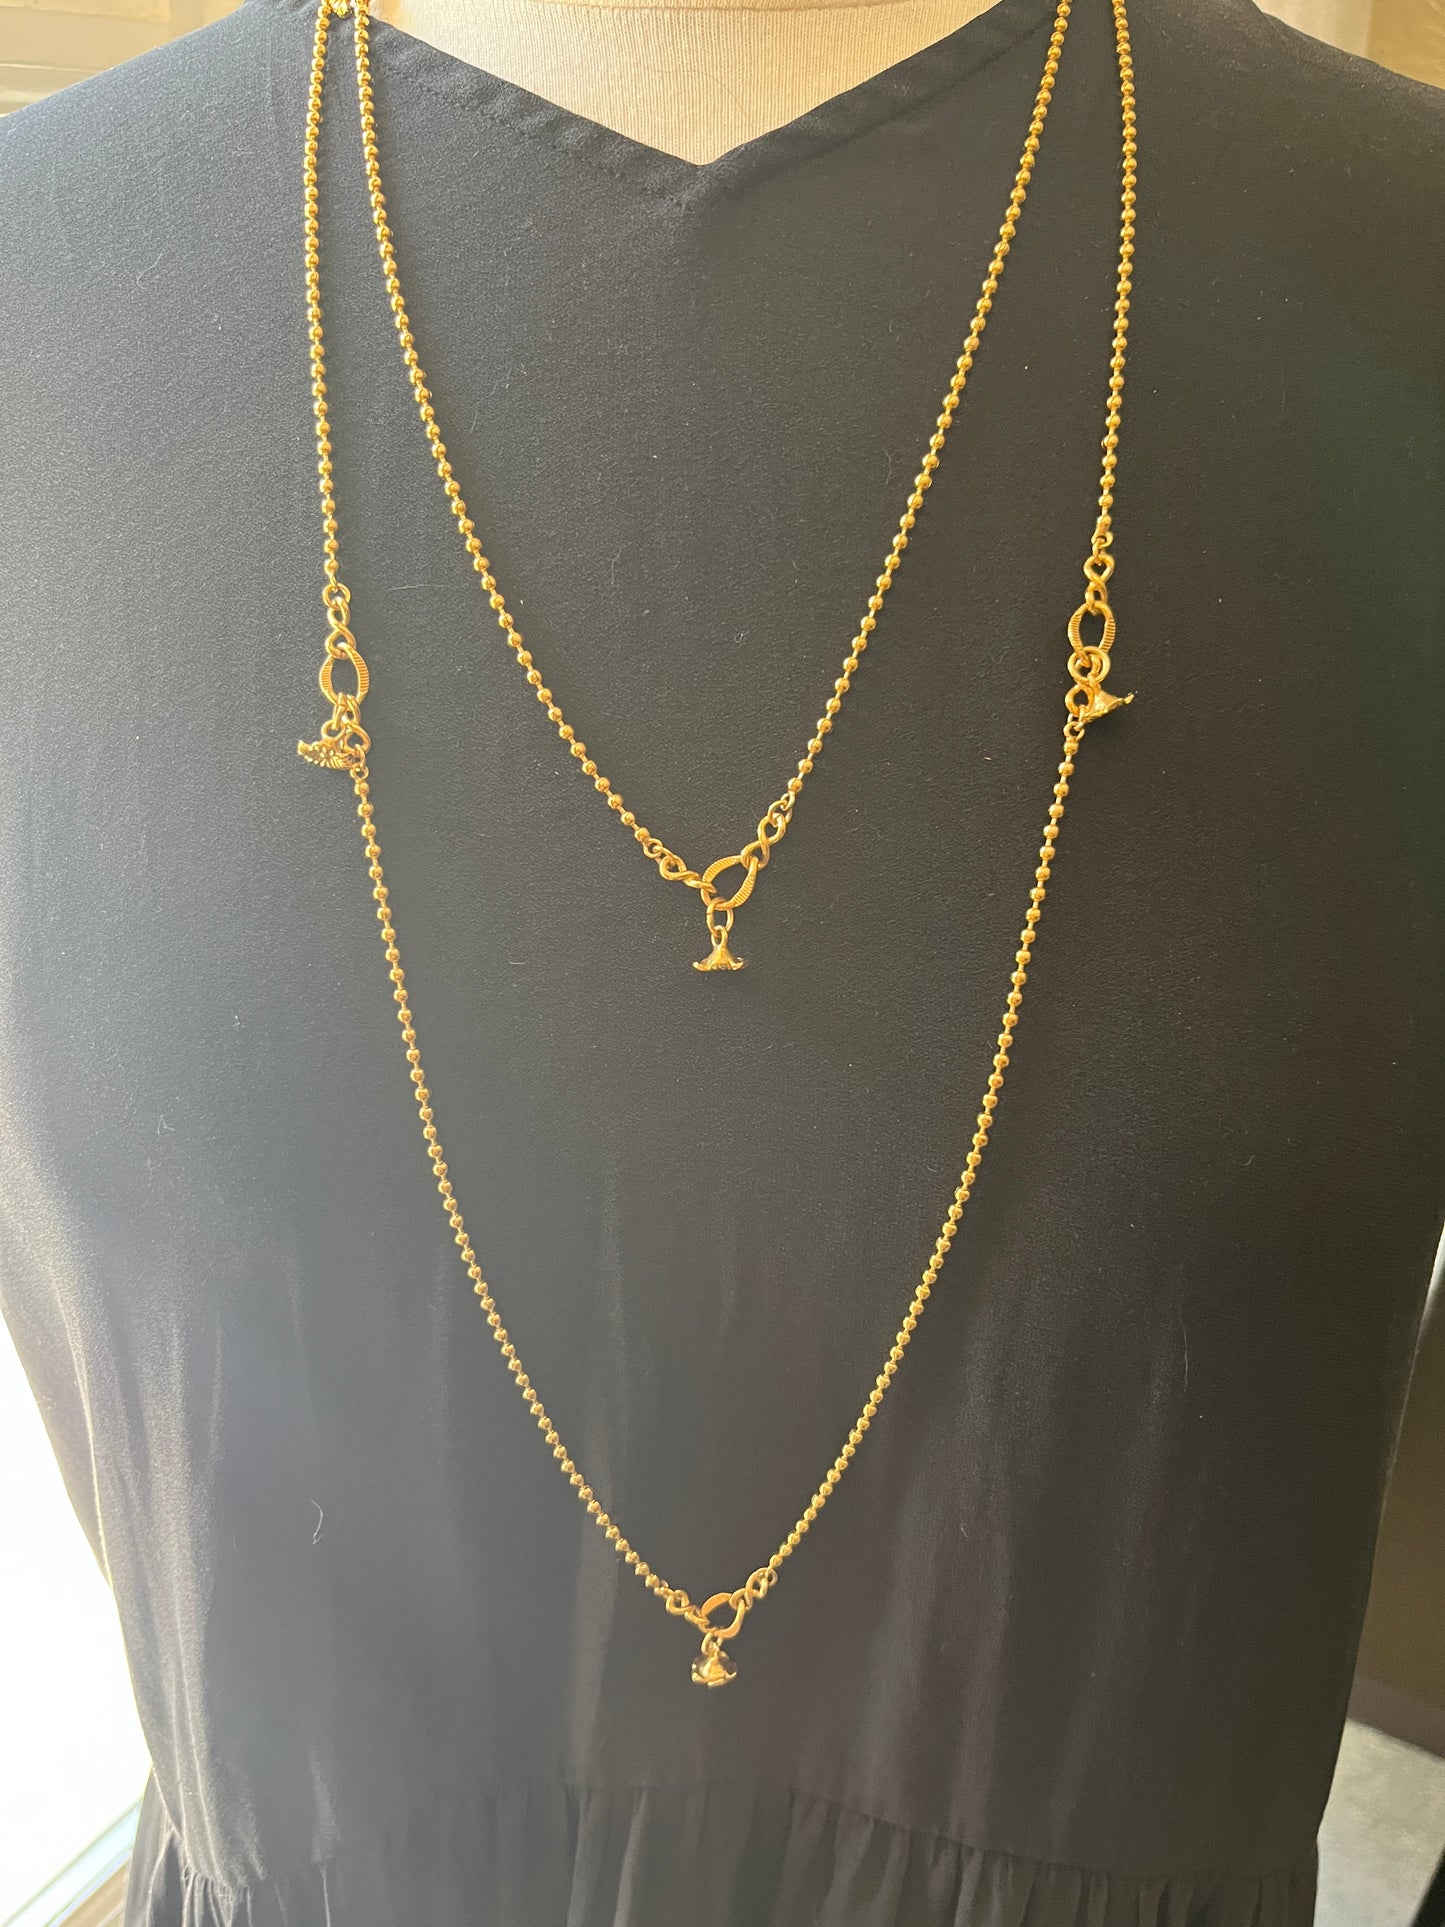 Bright Gold Wrap Necklace with Flower Charms